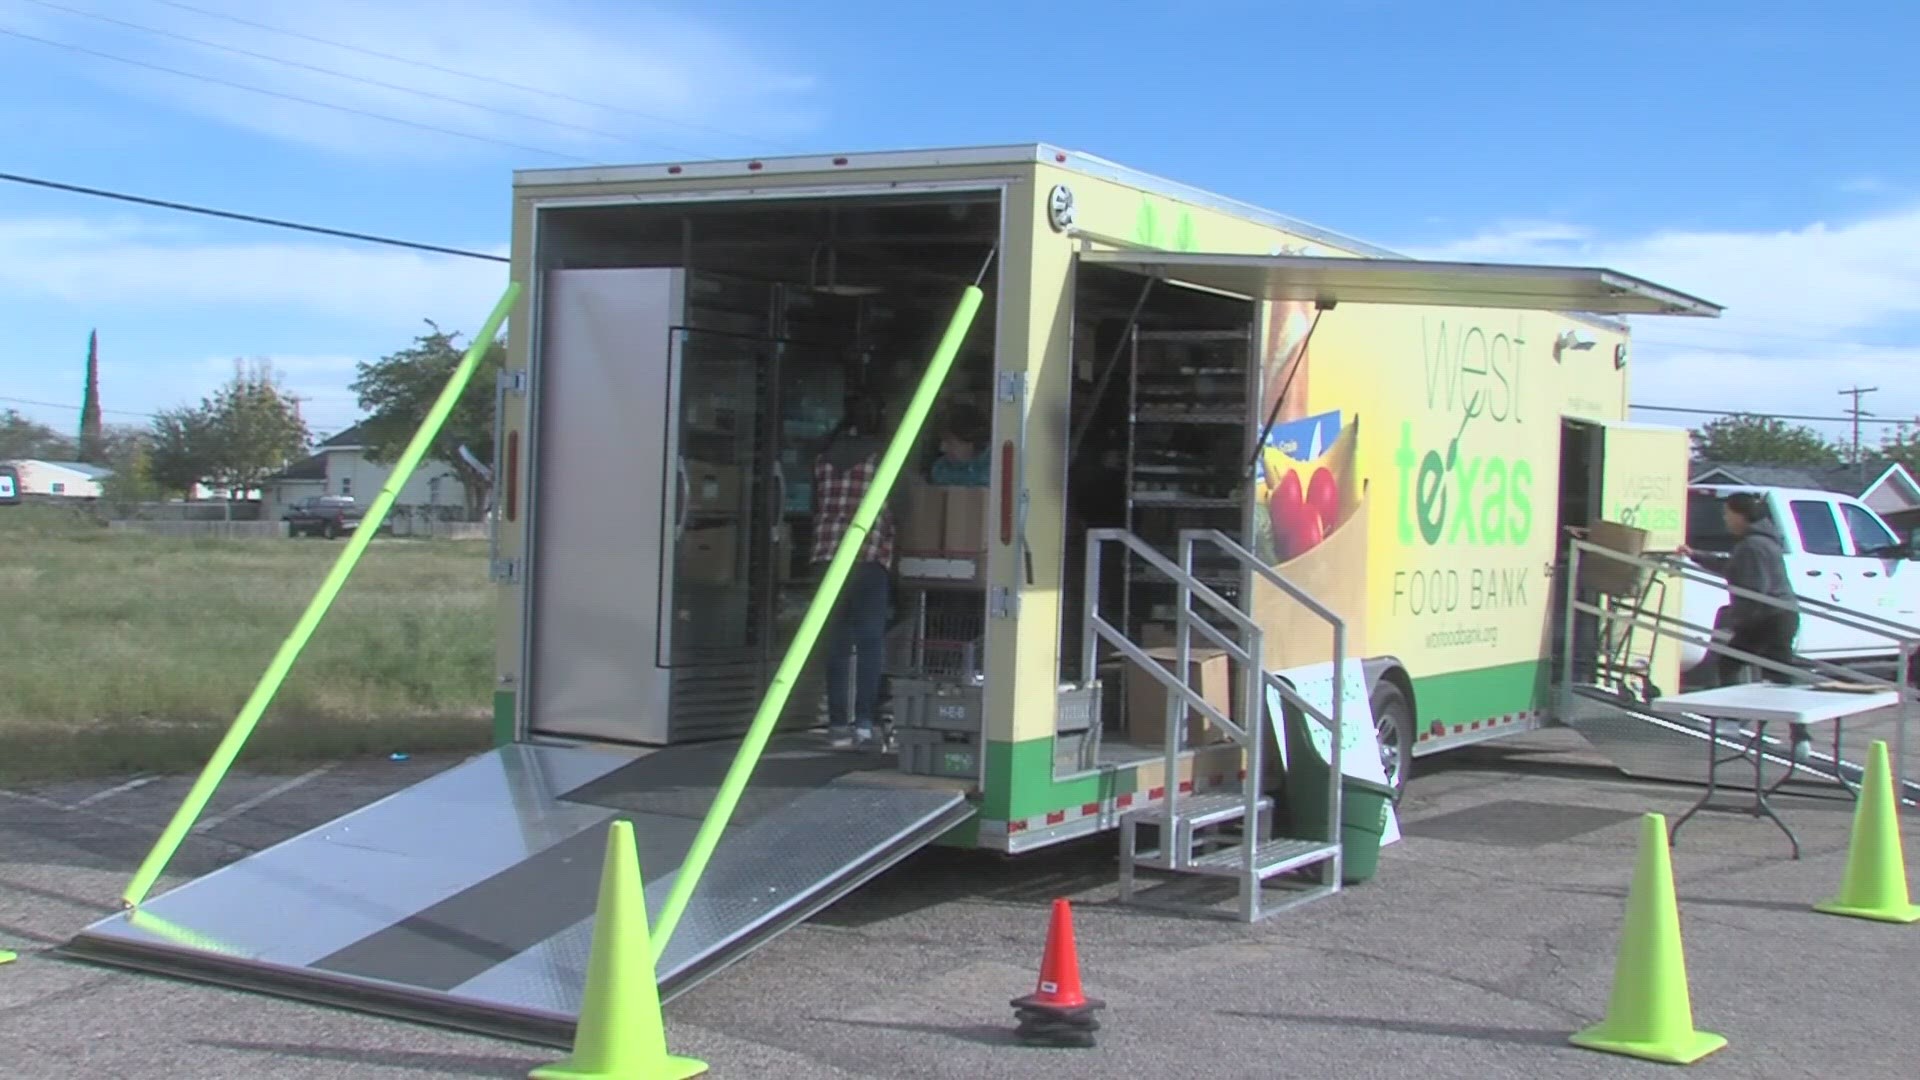 WTFB spoke with NewsWest 9 about how important the mobile food pantry is to their operations.